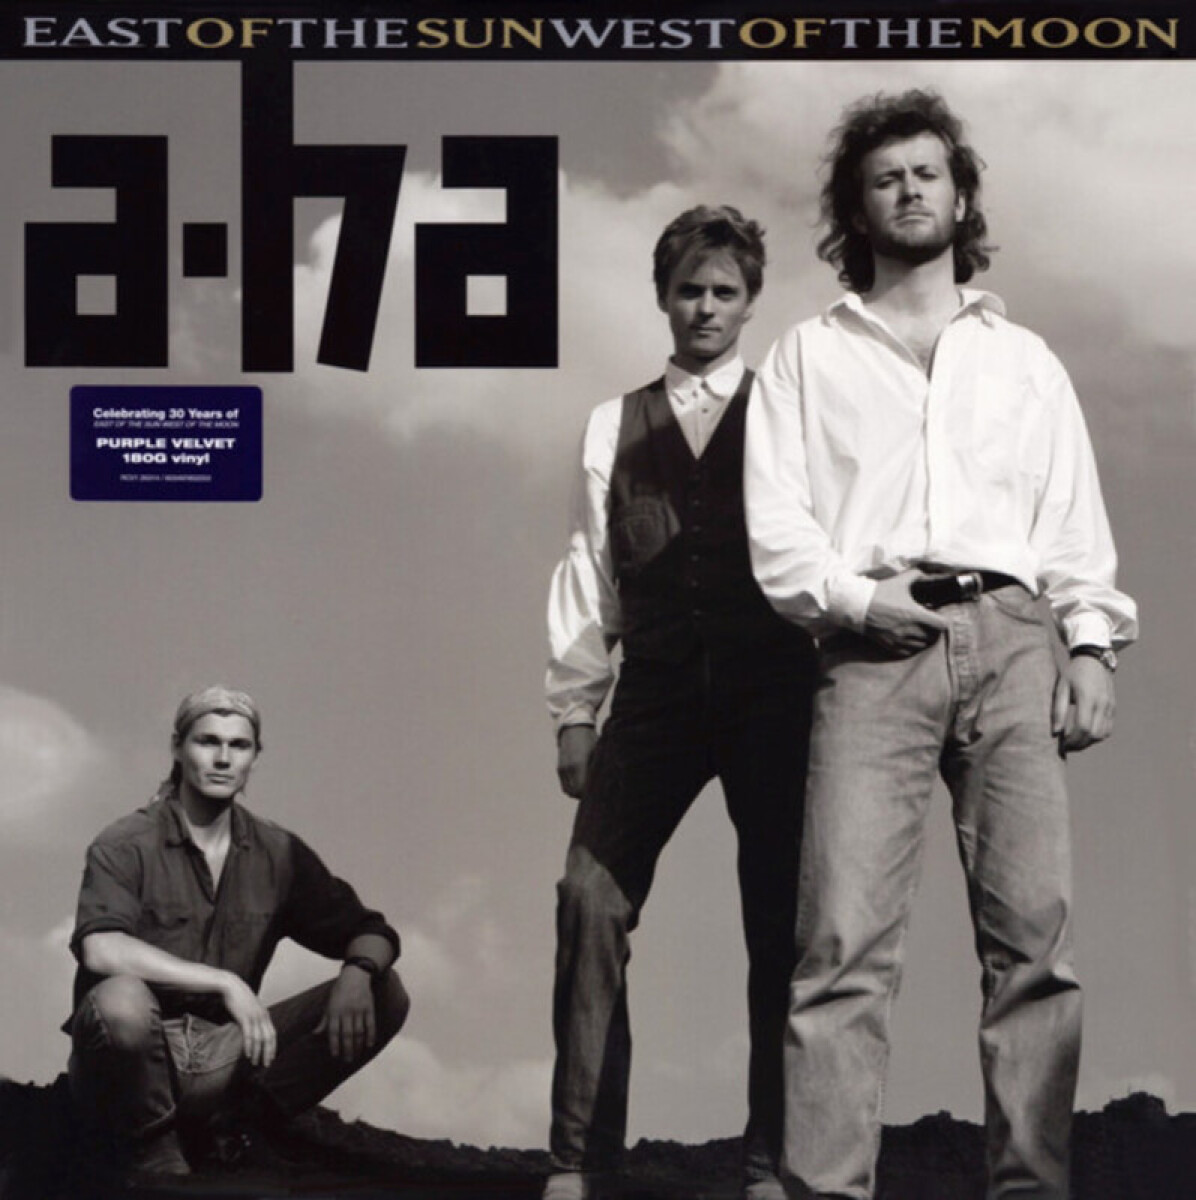 A-ha - East Of The Sun West Of The Moon - Vinilo 